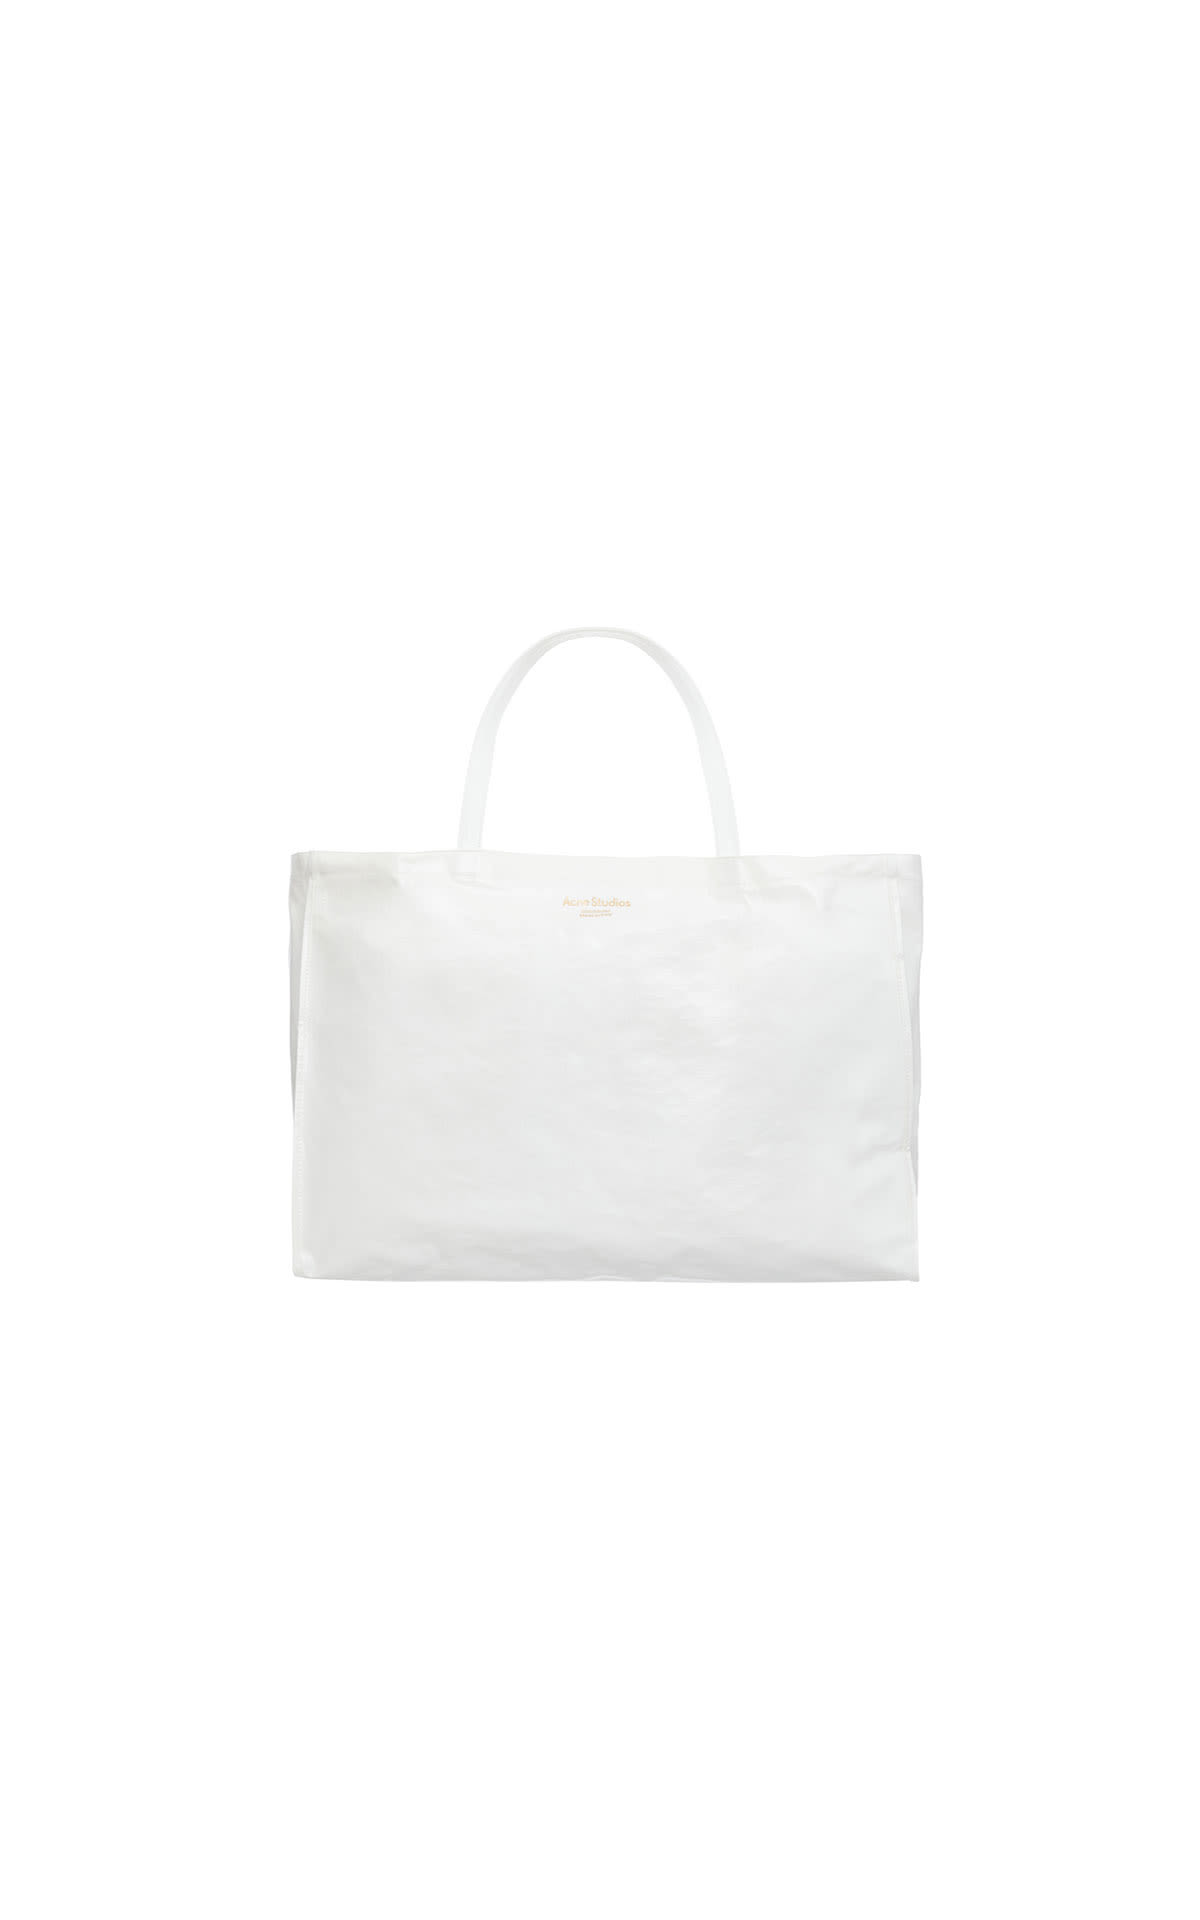 Acne Leather shopper tote from Bicester Village